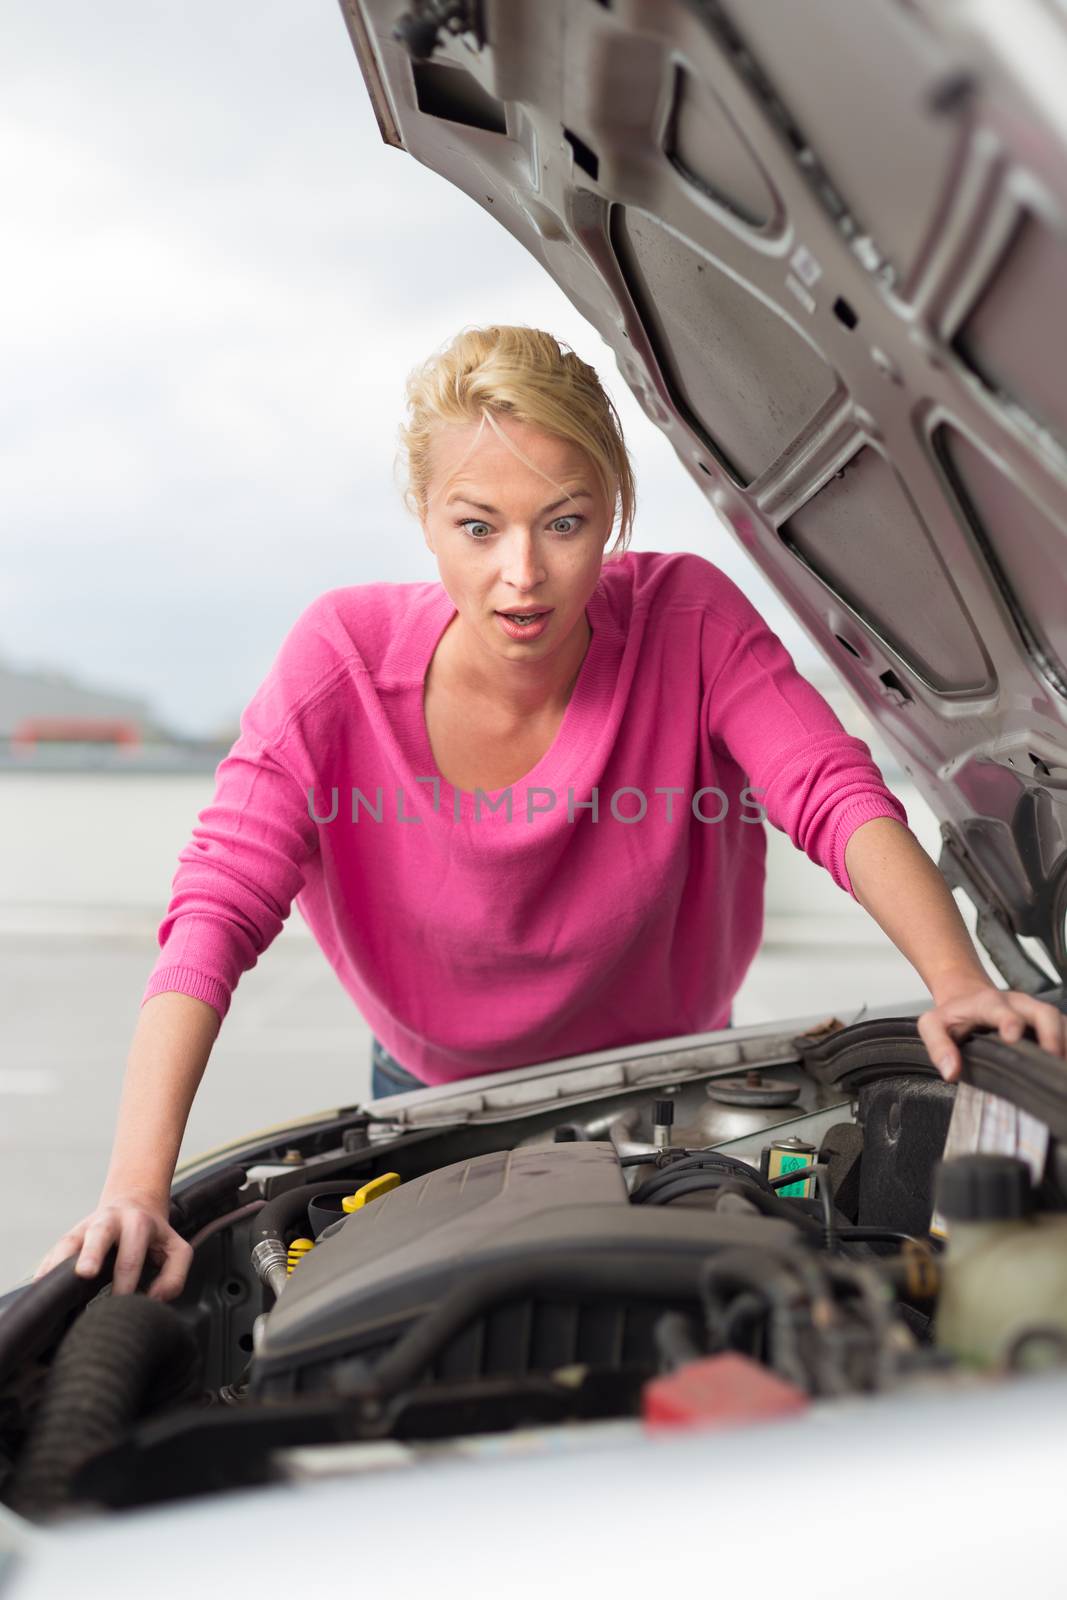 Stressed Young Woman with Car Defect. by kasto